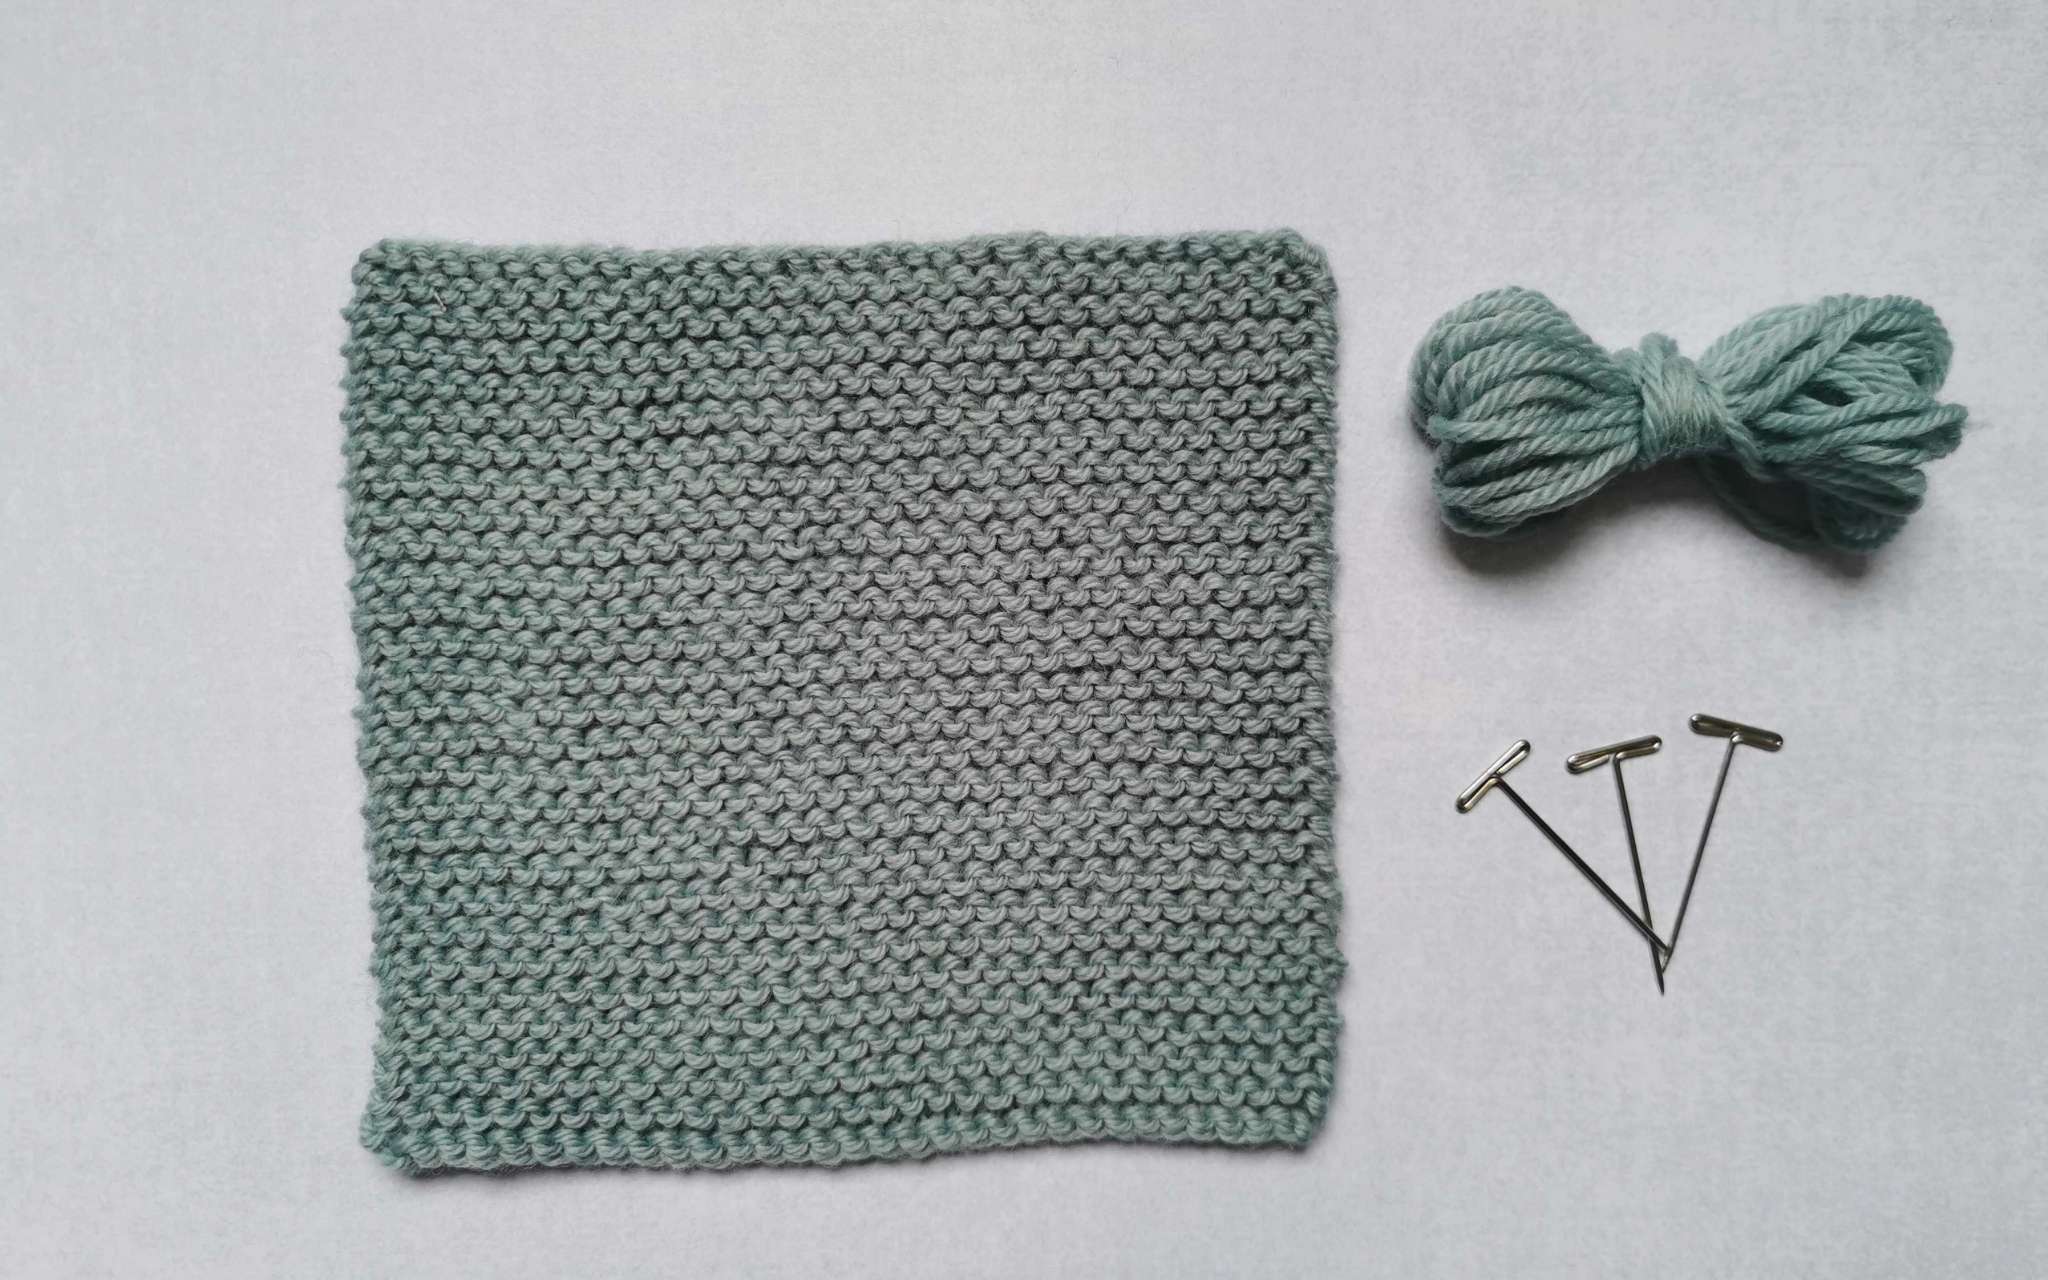 A square swatch of stocking stitch in pale blue, with some bundled up spare yarn and t-pins laying beside it to the right.